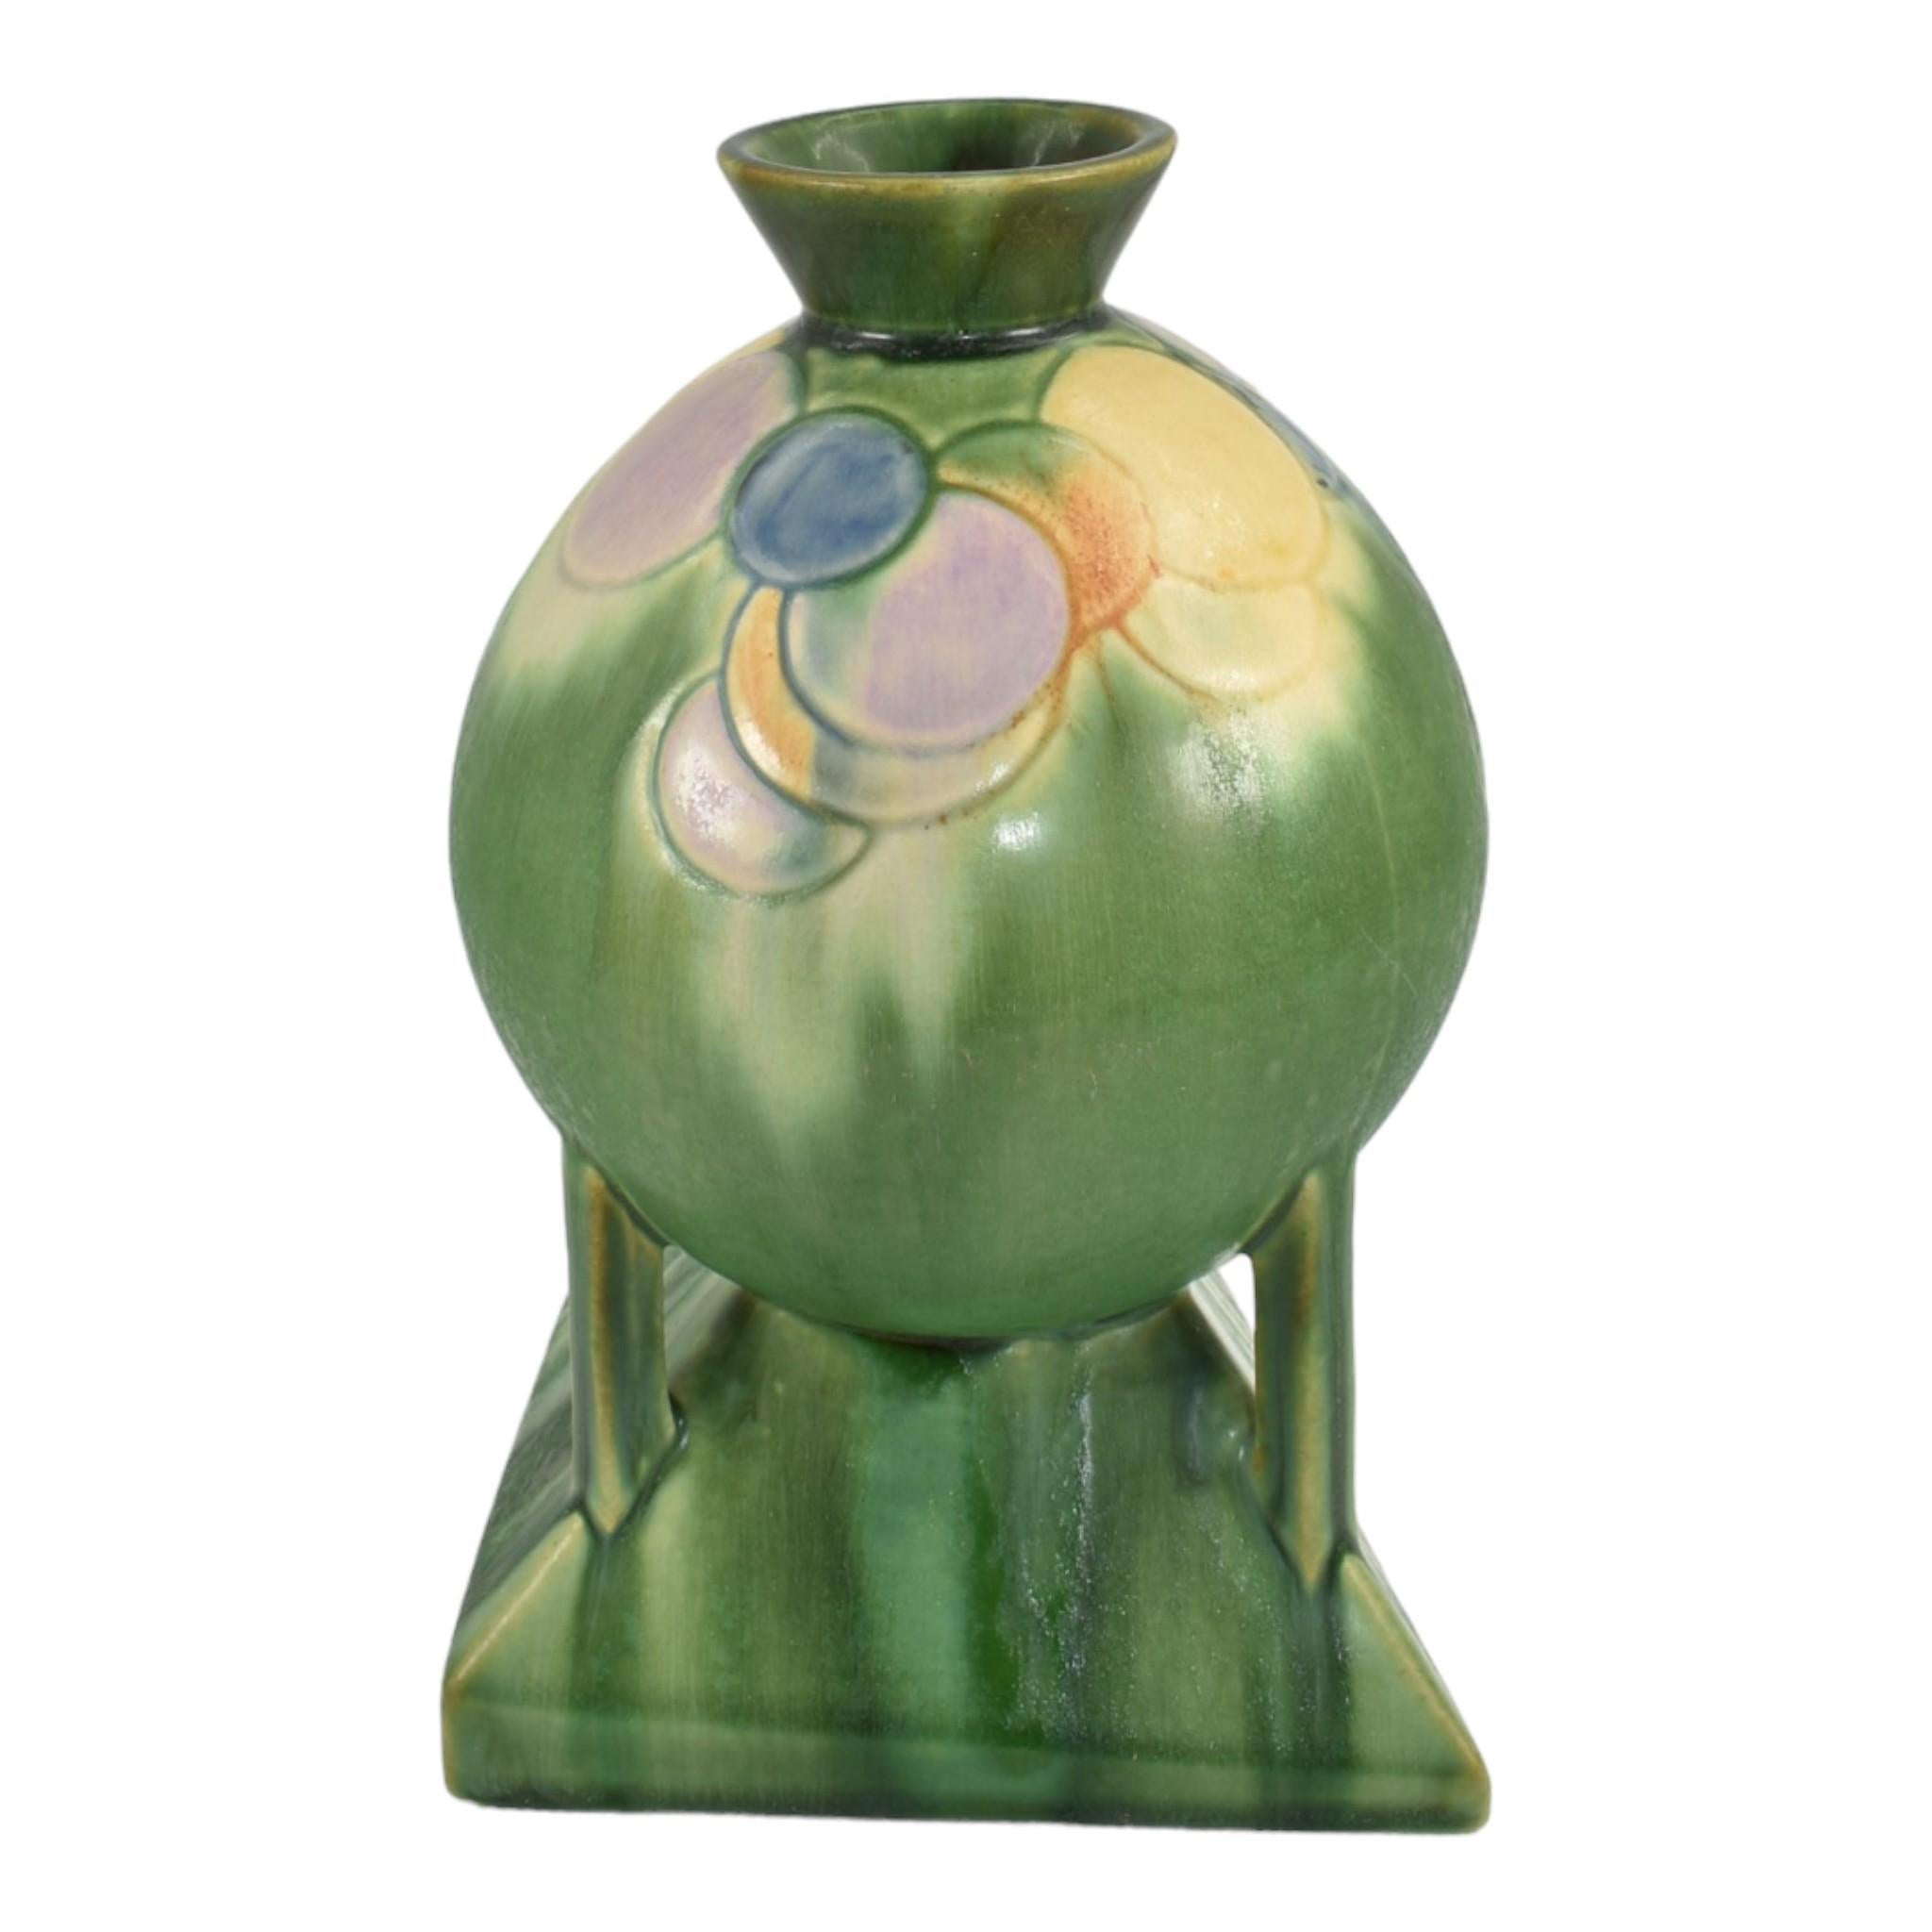 Roseville Futura Green 1928 Vintage Art Deco Pottery Balloons Globe Vase 404-8 In Good Condition For Sale In East Peoria, IL